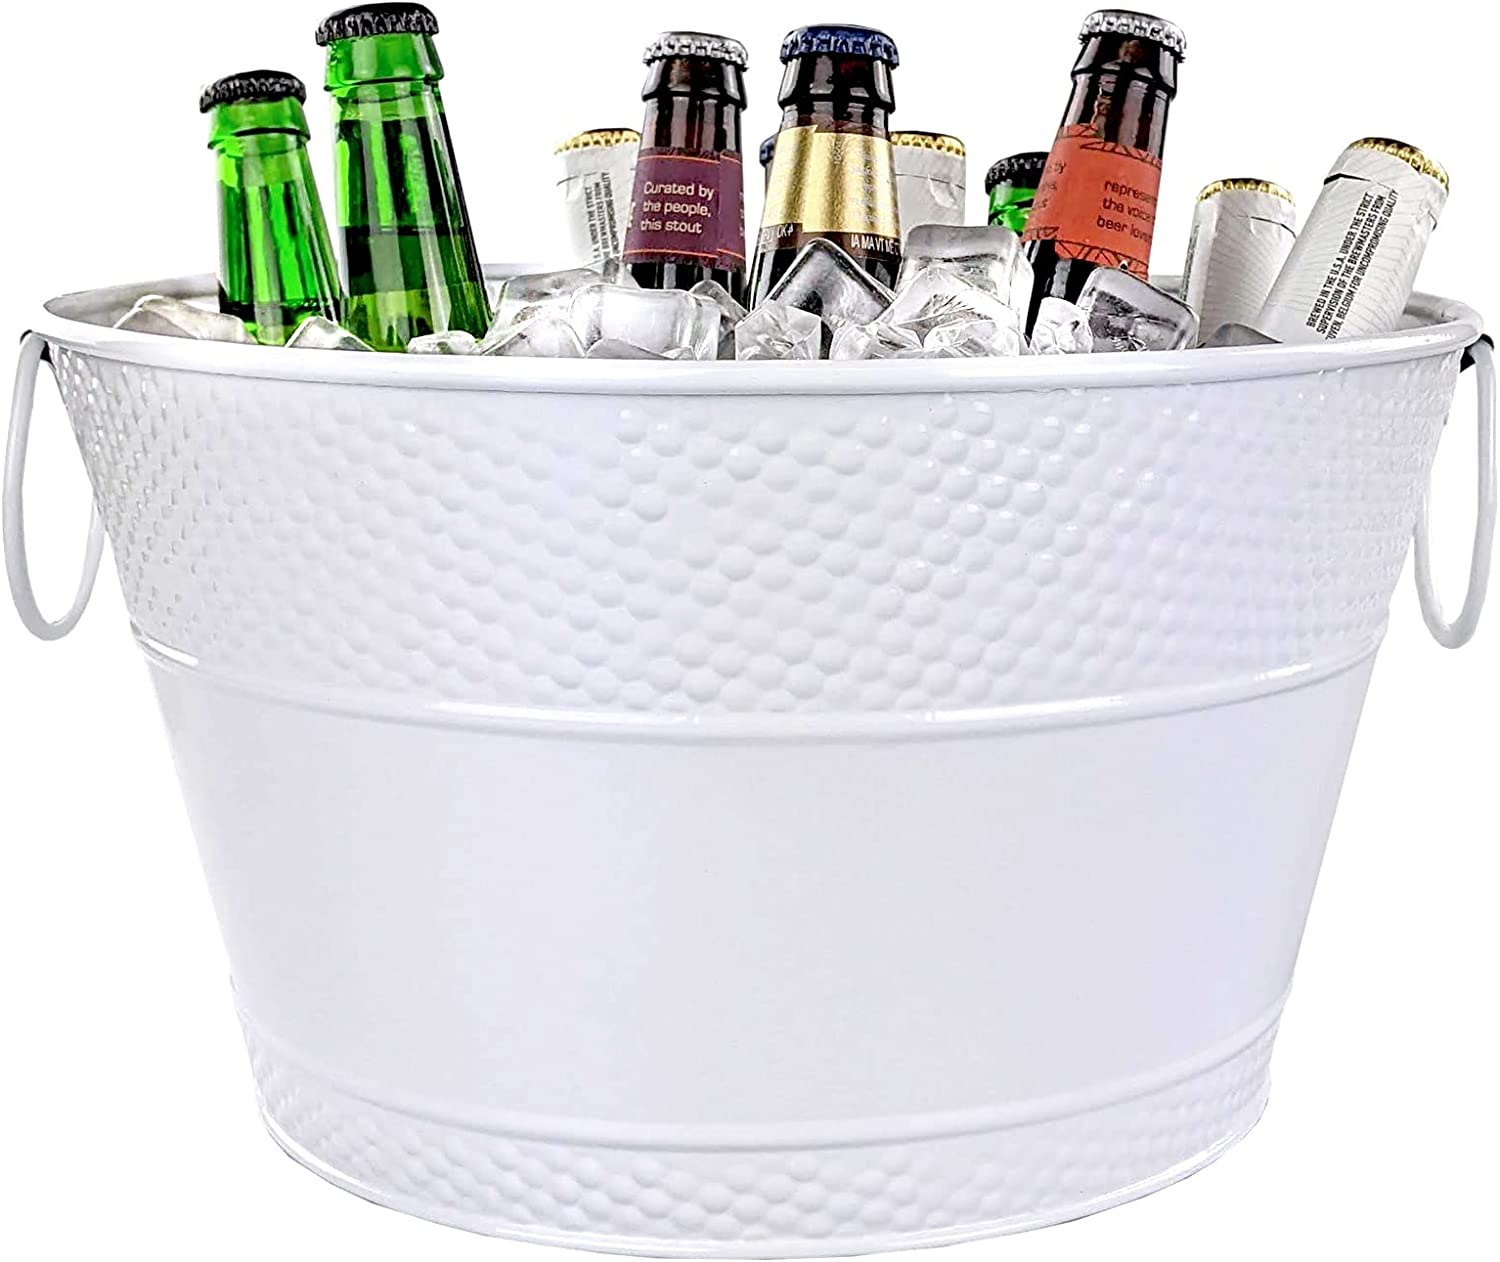 True Classic Oval Ice Bucket, Galvanized Metal Drink Cooler Beverage Tub, Chill Wine & Beer, 6.3 For Home Parties Gallons, 22.75 X 9.25